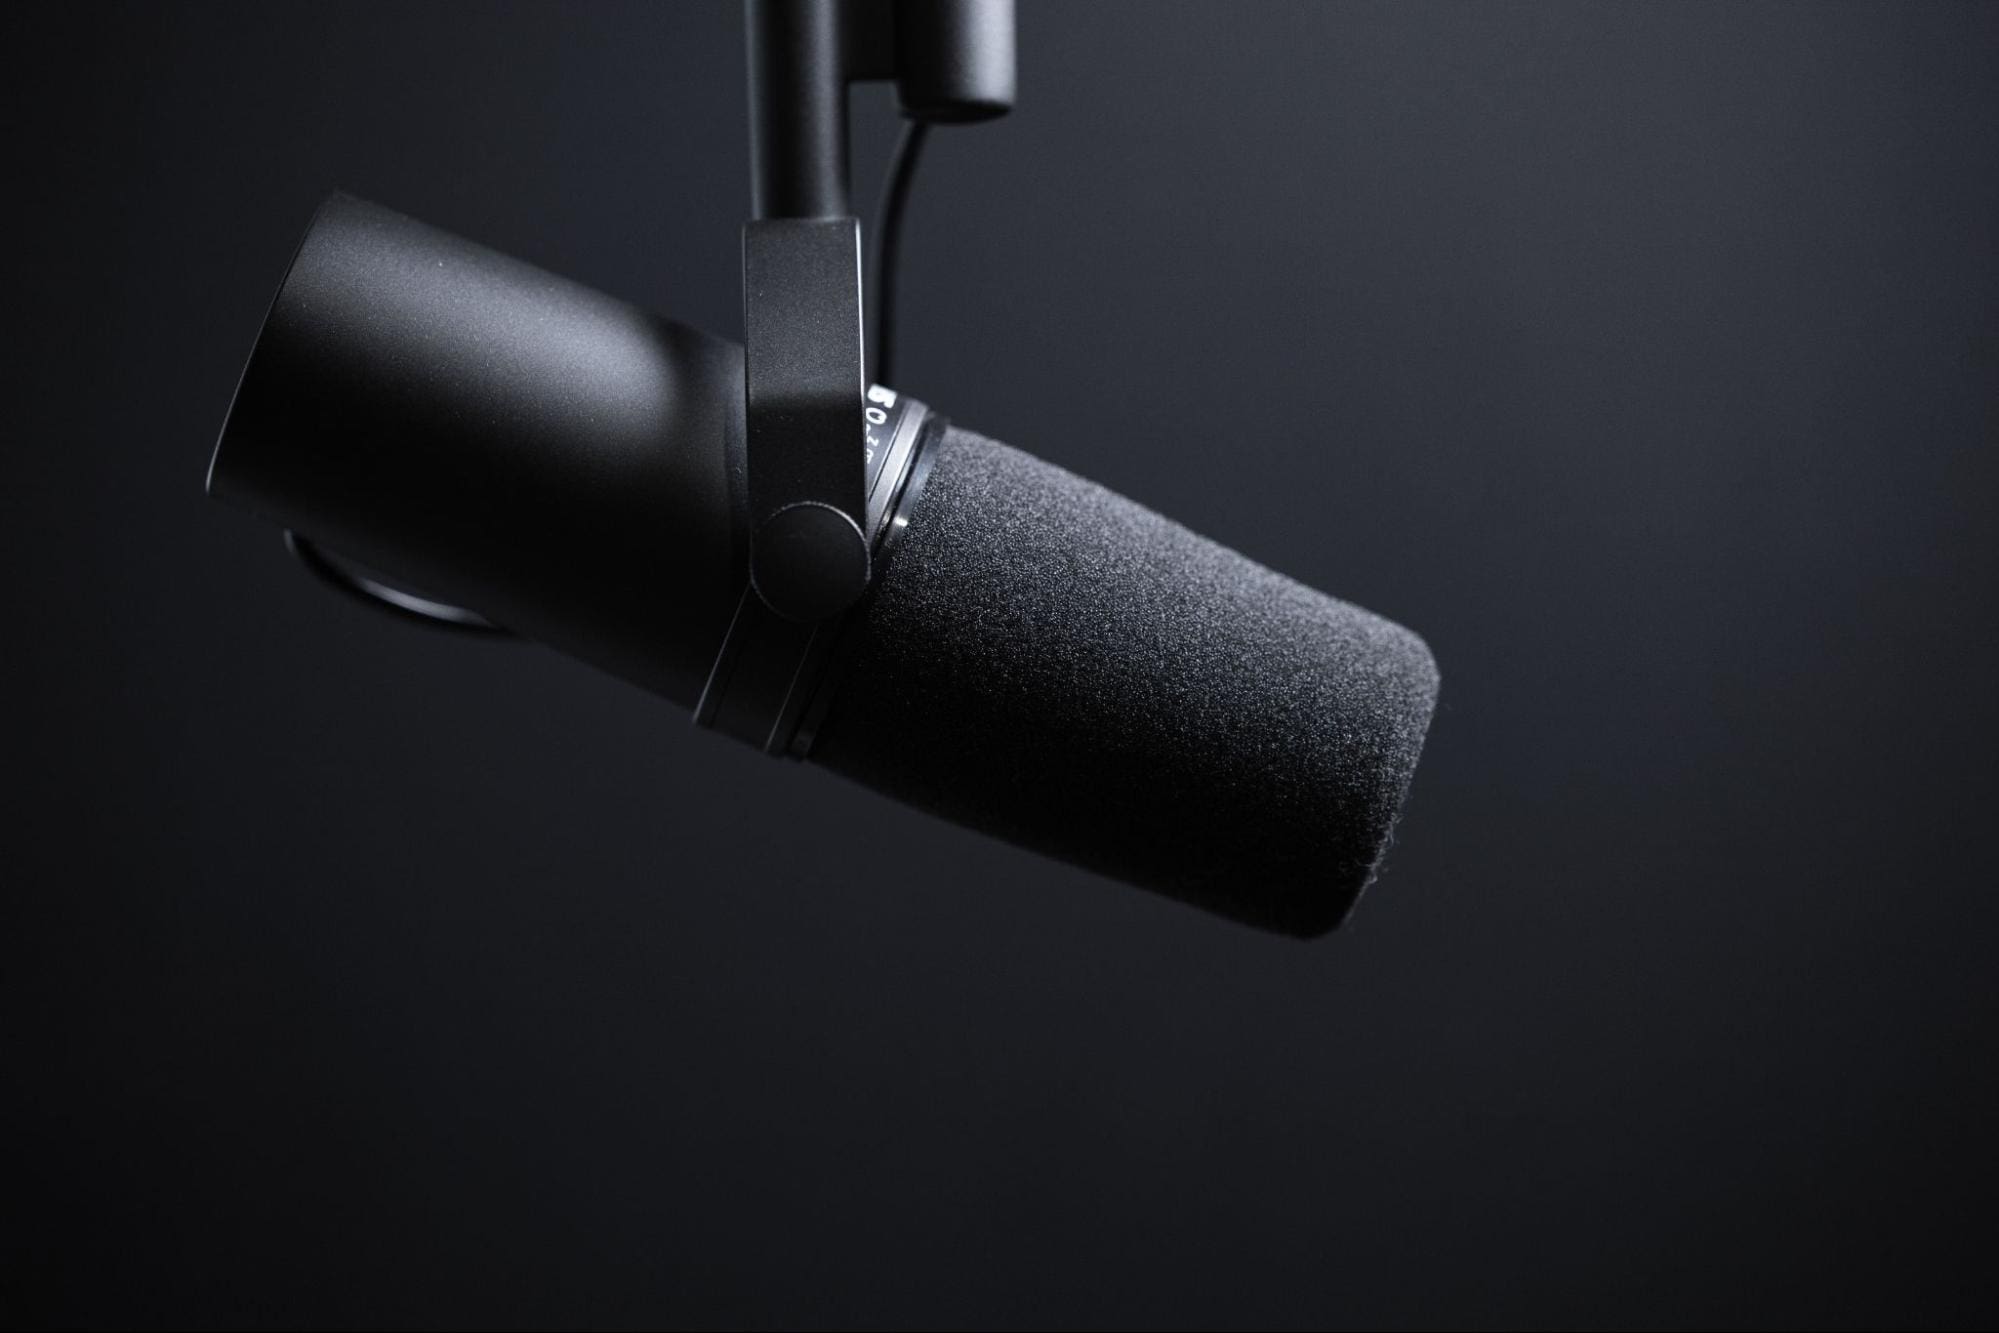 Top Data Science Podcasts for 2022